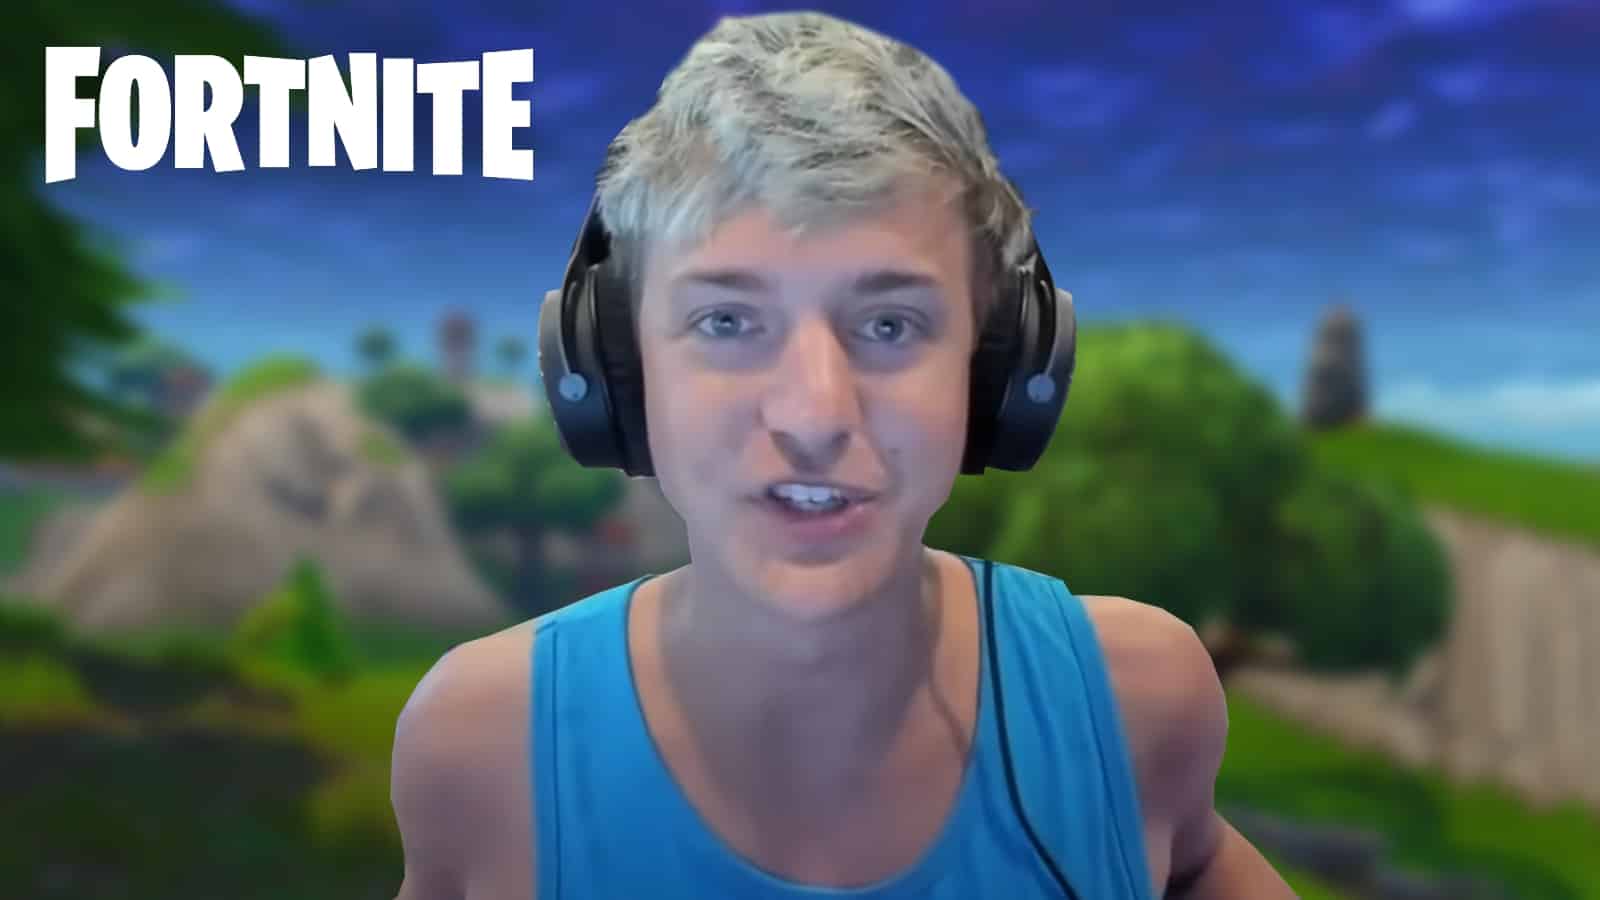 Ninja proves he’s back to his best with insane Fortnite trick shot ...